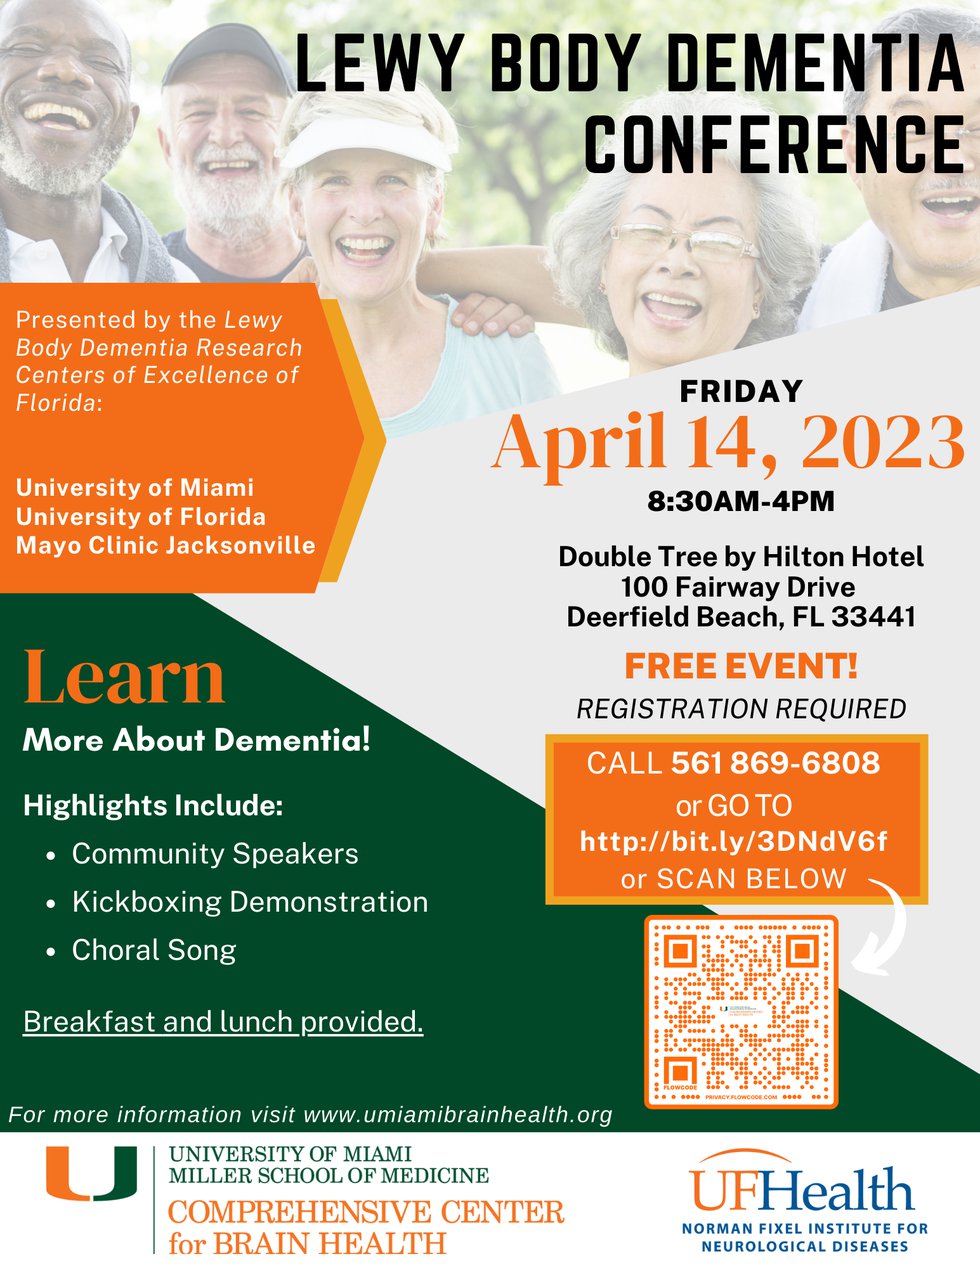 Lewy Body Dementia Conference